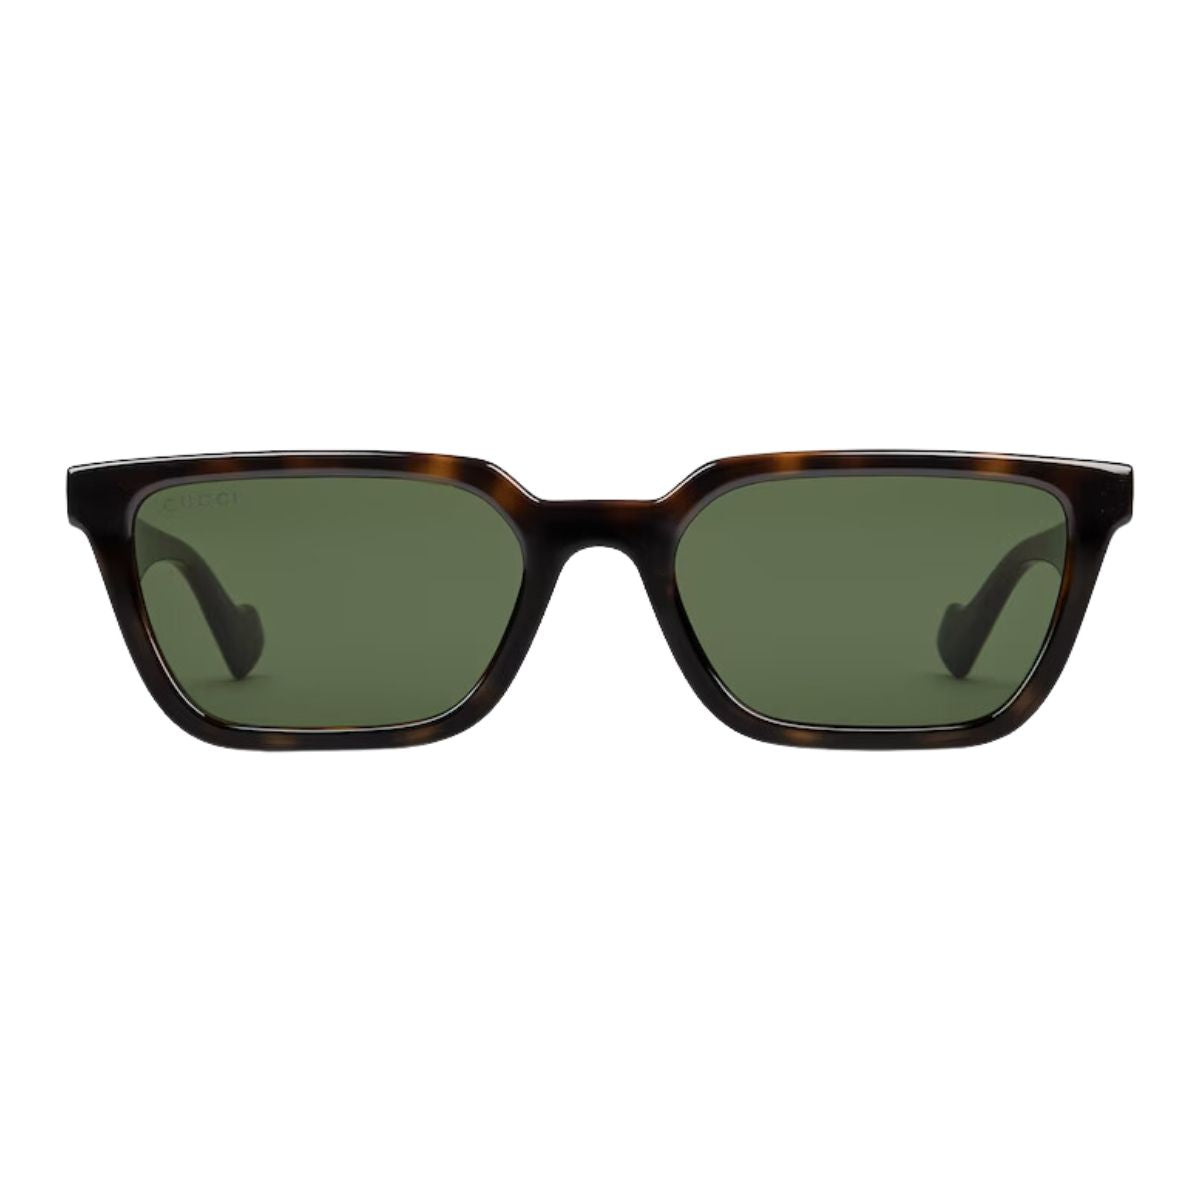 "Gucci 1539S 002 Sunglasses - Stay Stylish with Optorium's Collection"